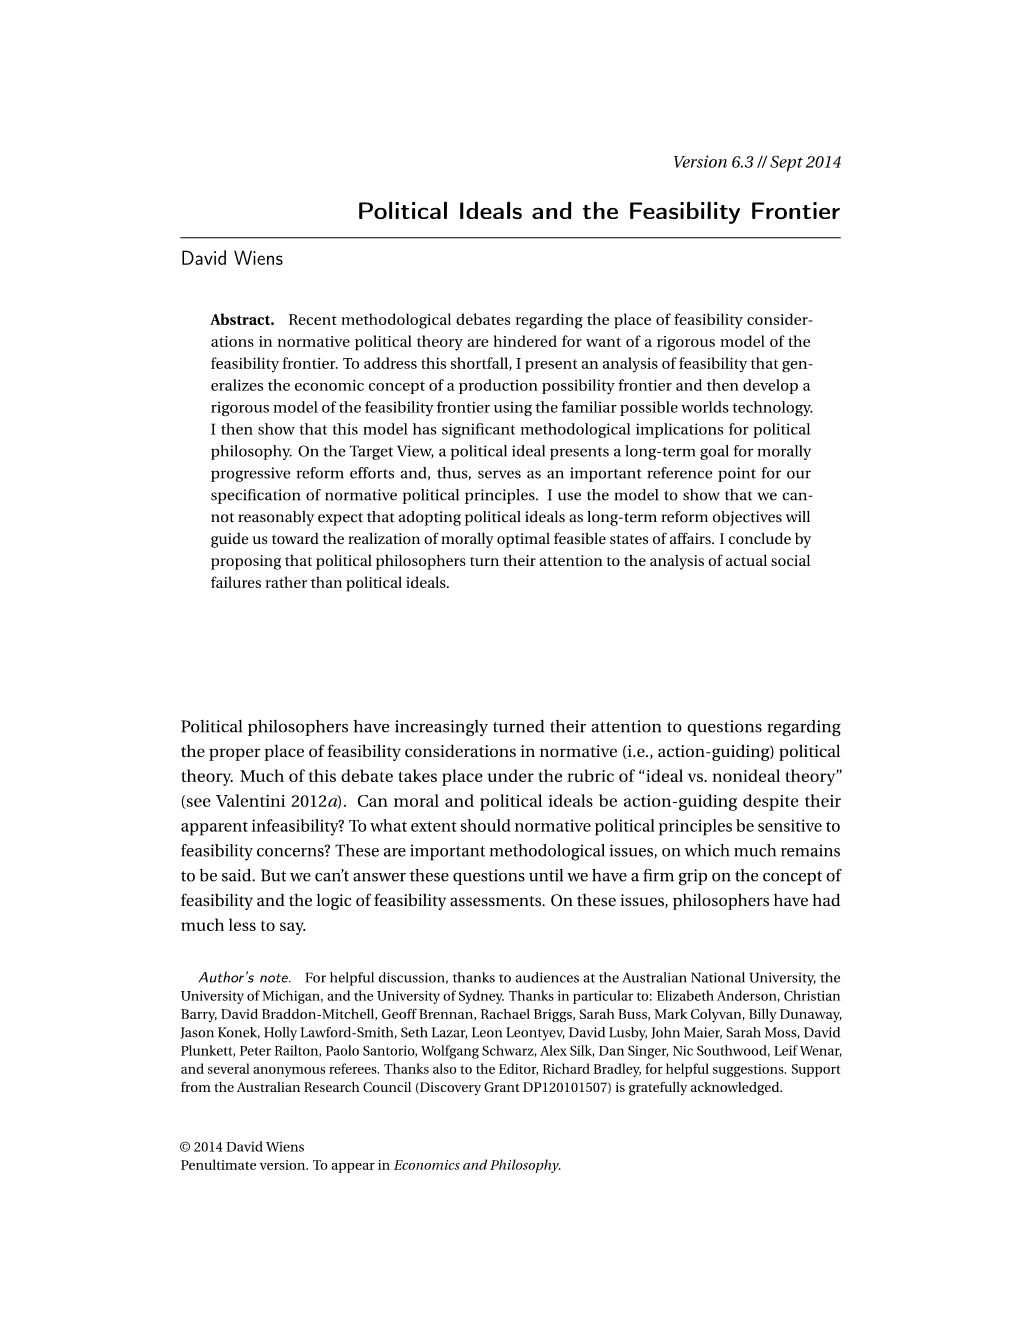 Political Ideals and the Feasibility Frontier